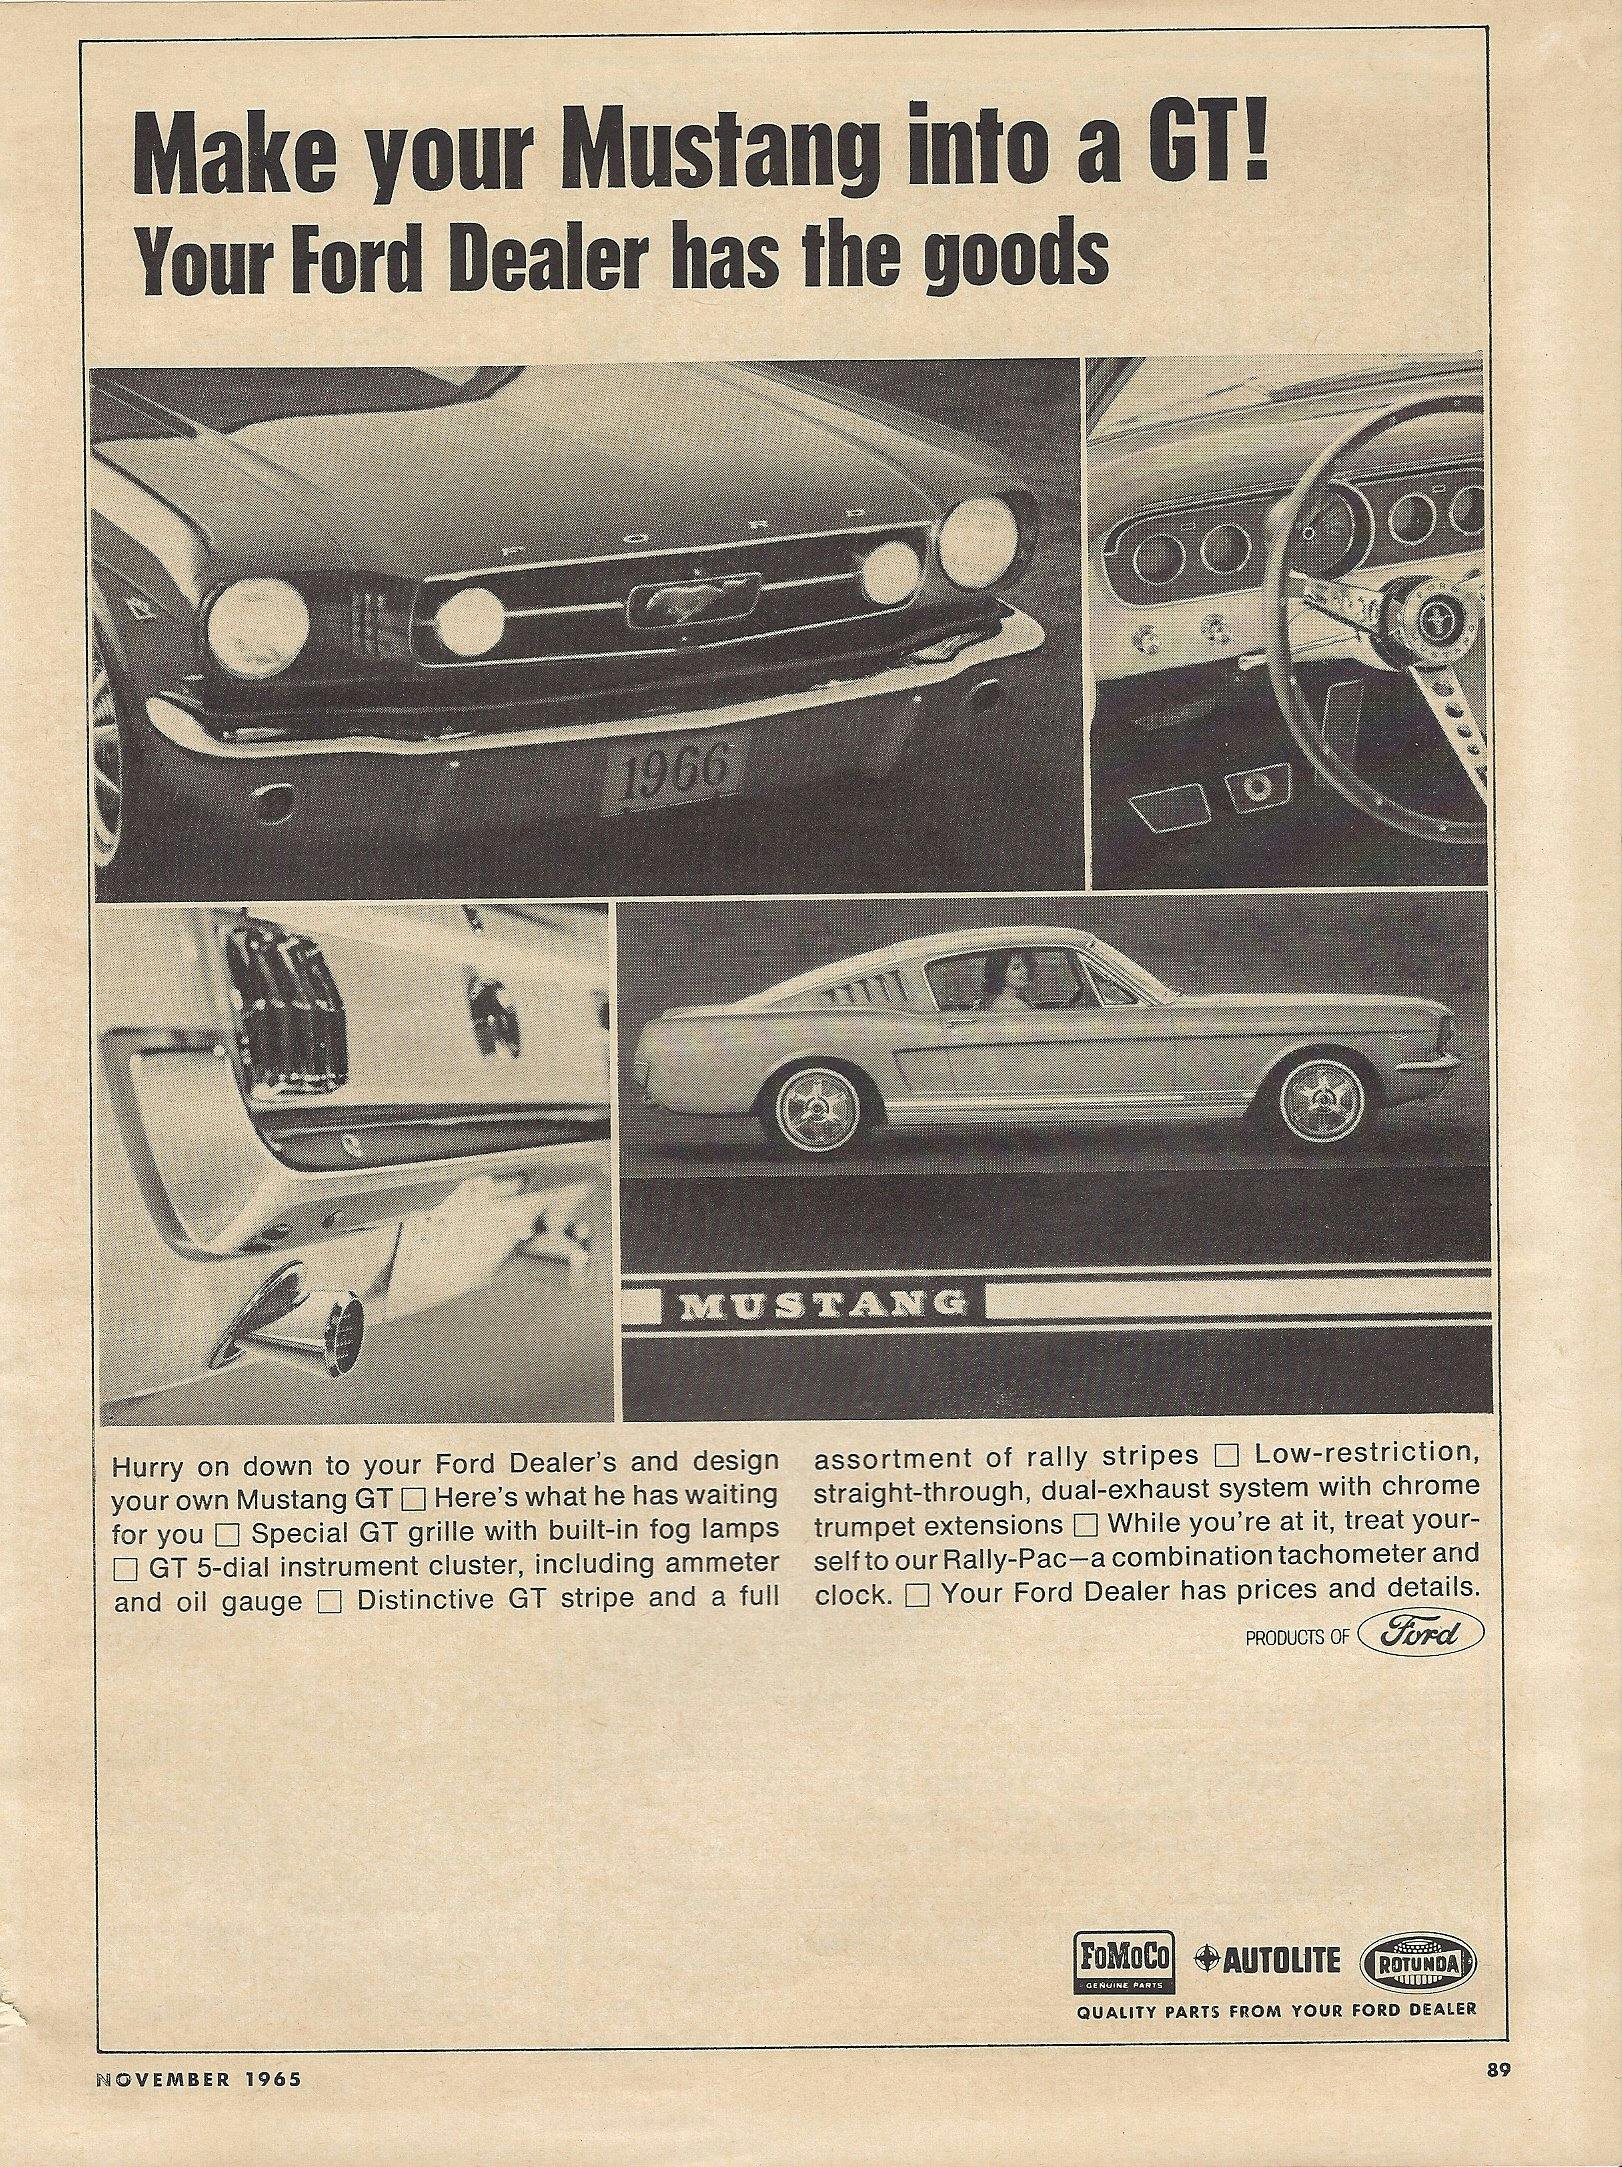 1965 Ford GT parts advertisement